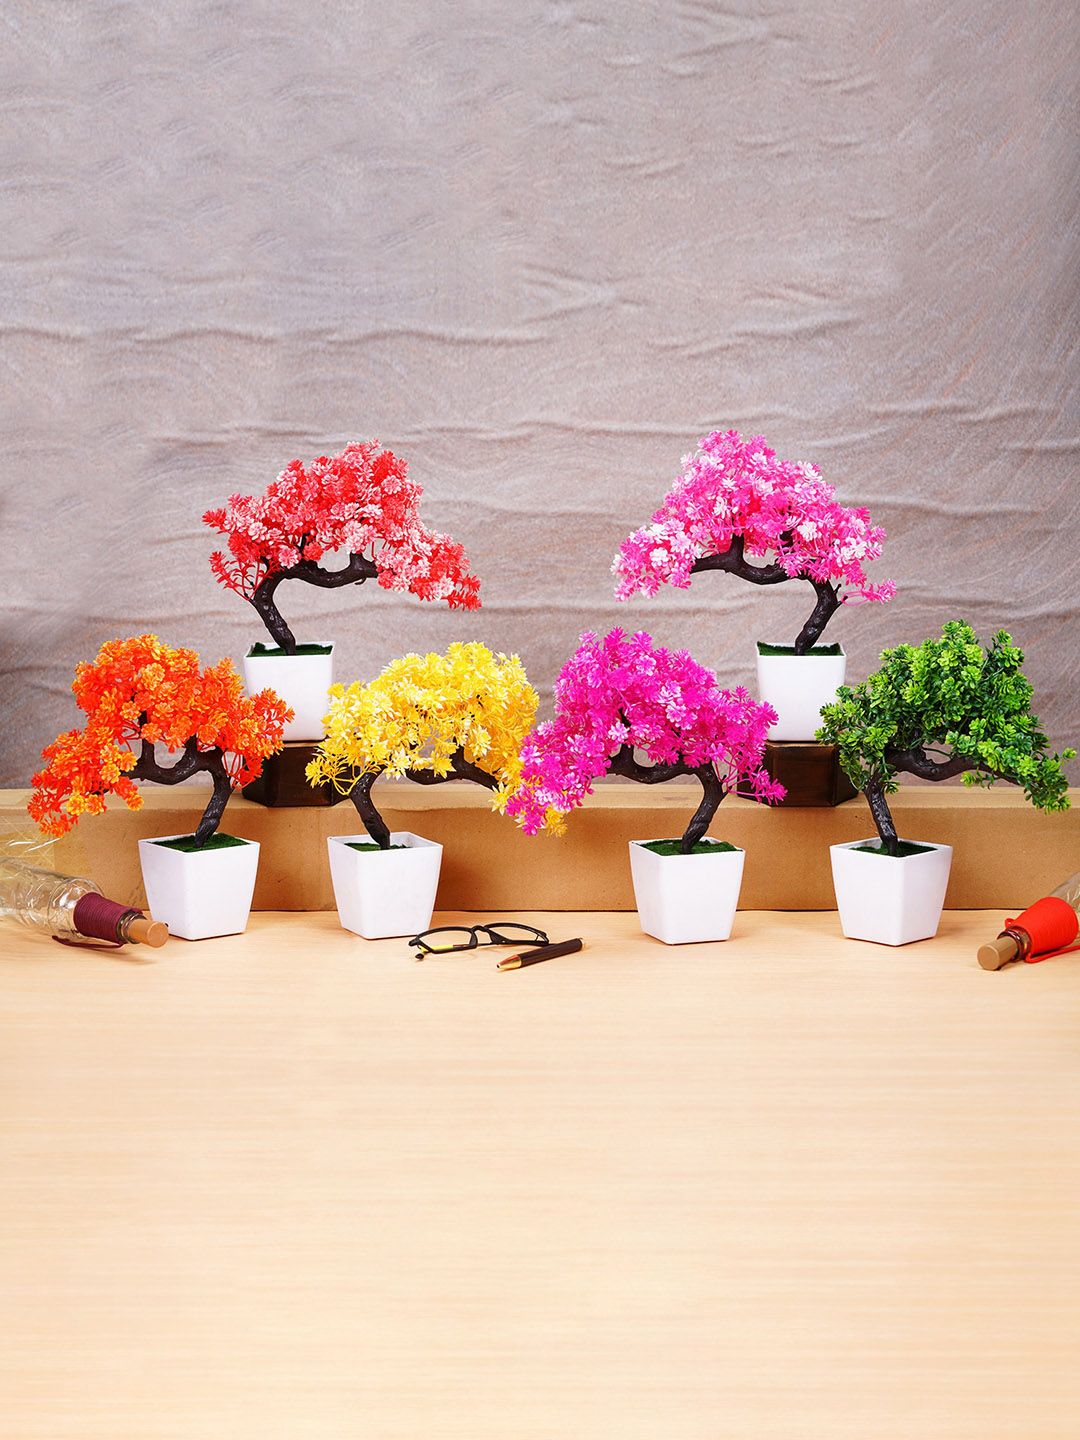 Dekorly Set of 6 Artificial Colourful Wild Bonsai Plants With Pot for Home Decor and Gifting Price in India